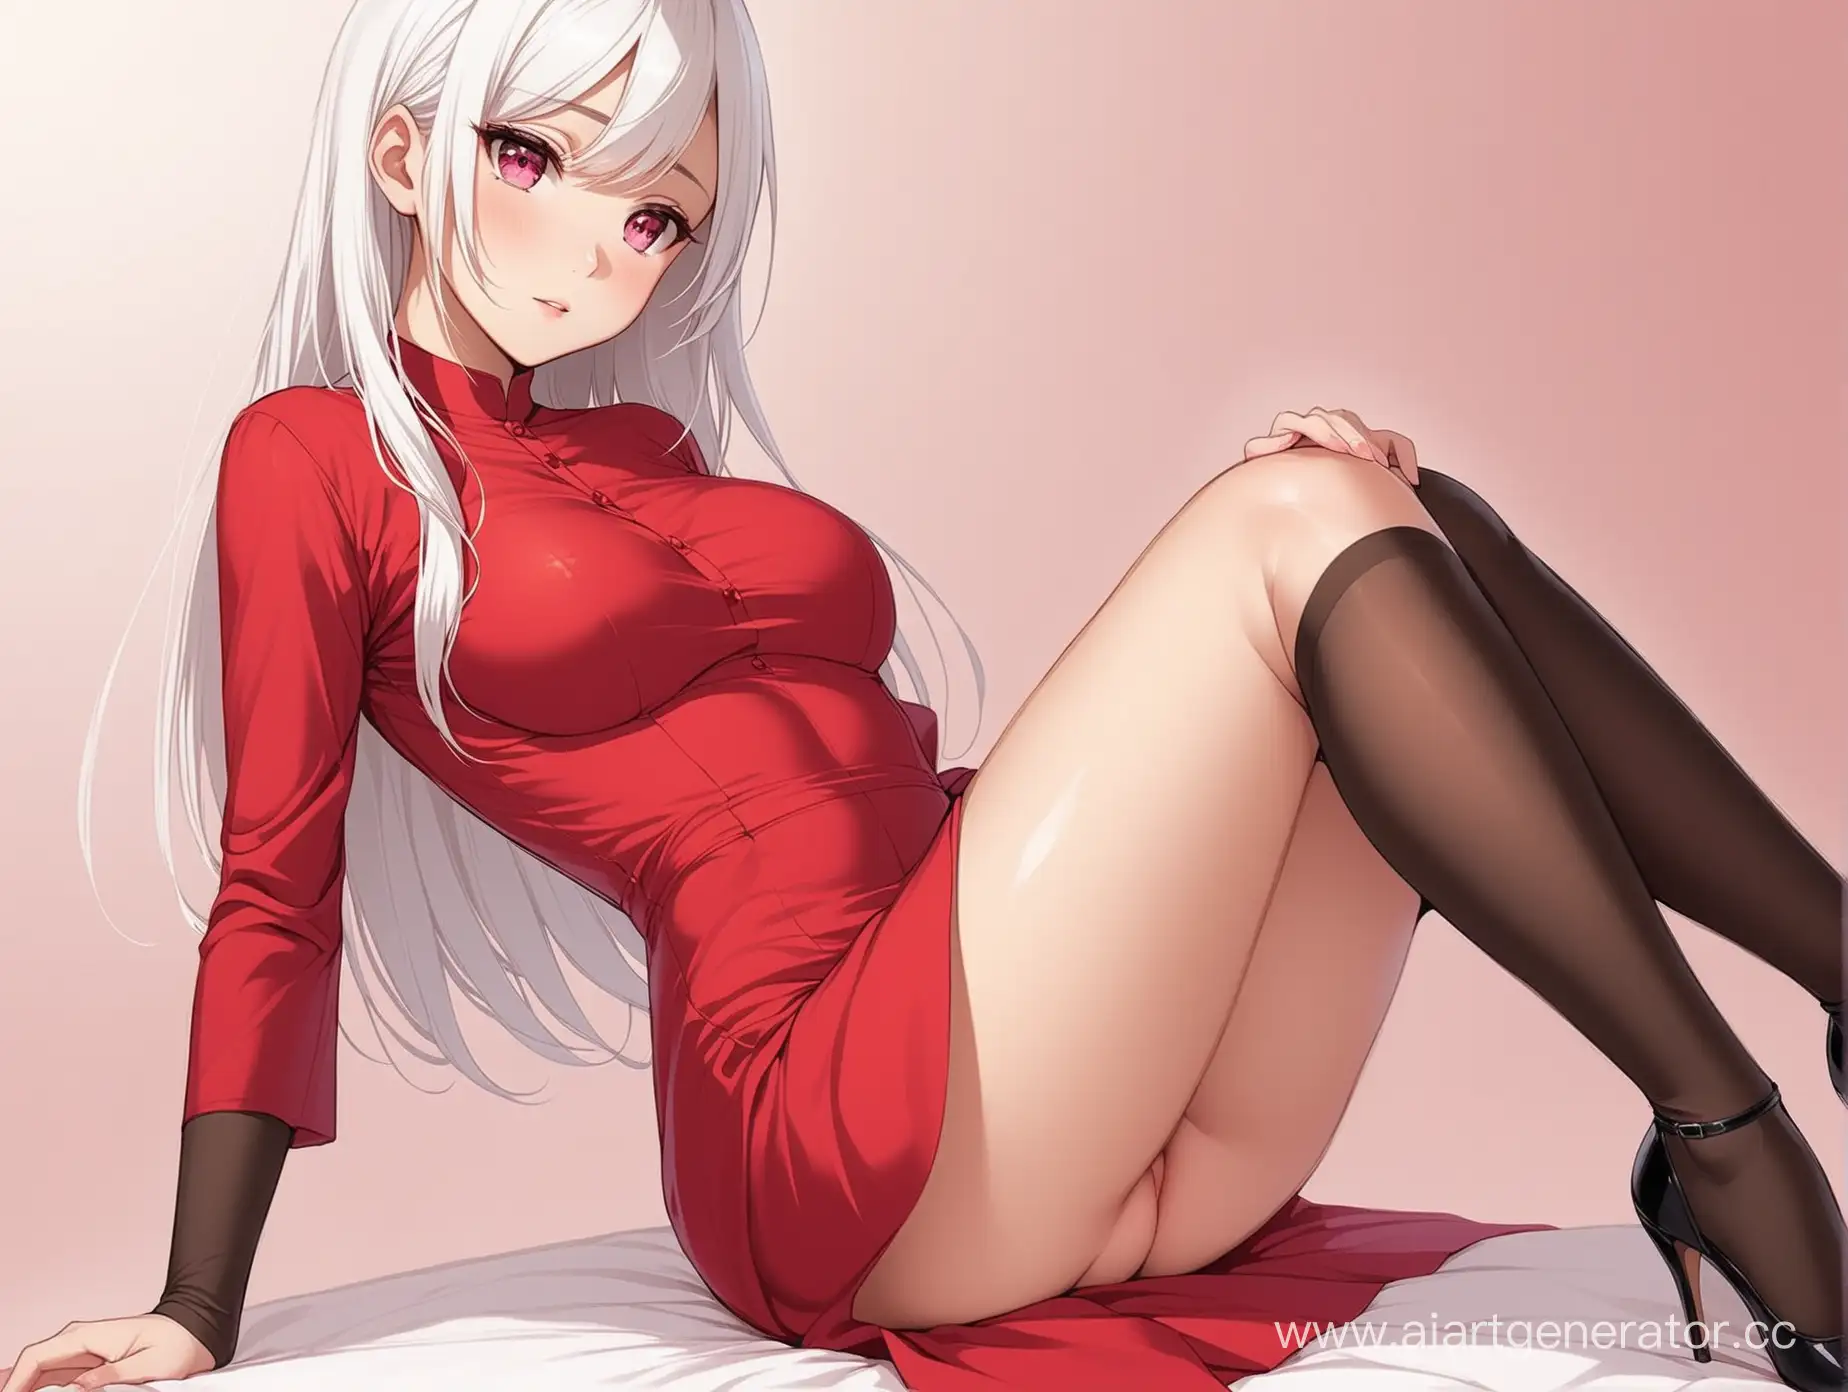 sexy girl, white hair, pink eyes, red dress nudity in stockings modest.